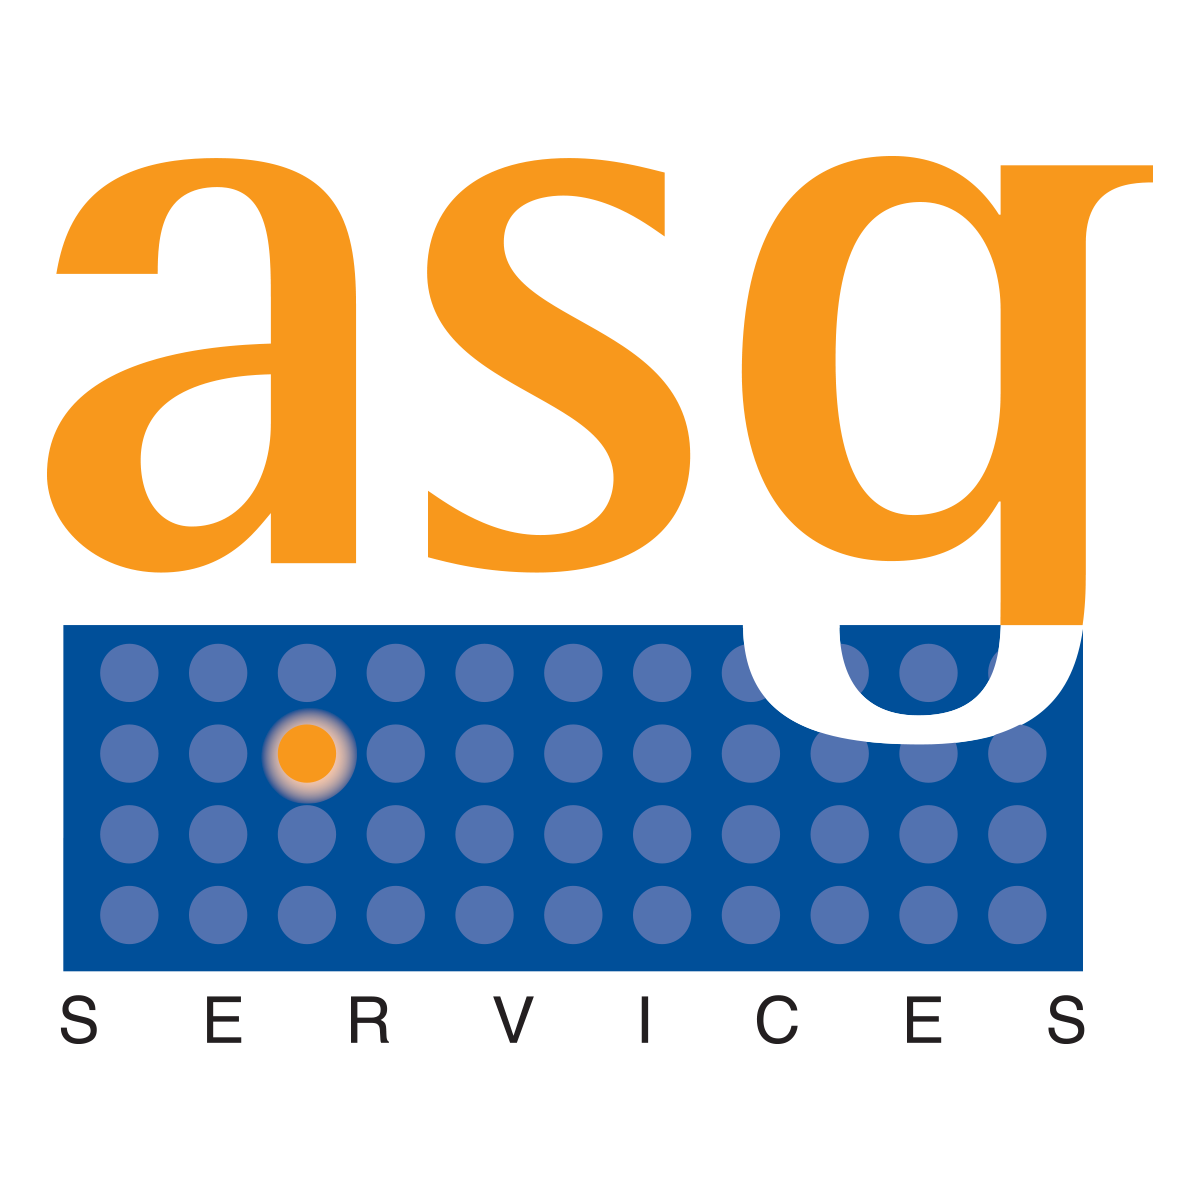 ASG Services